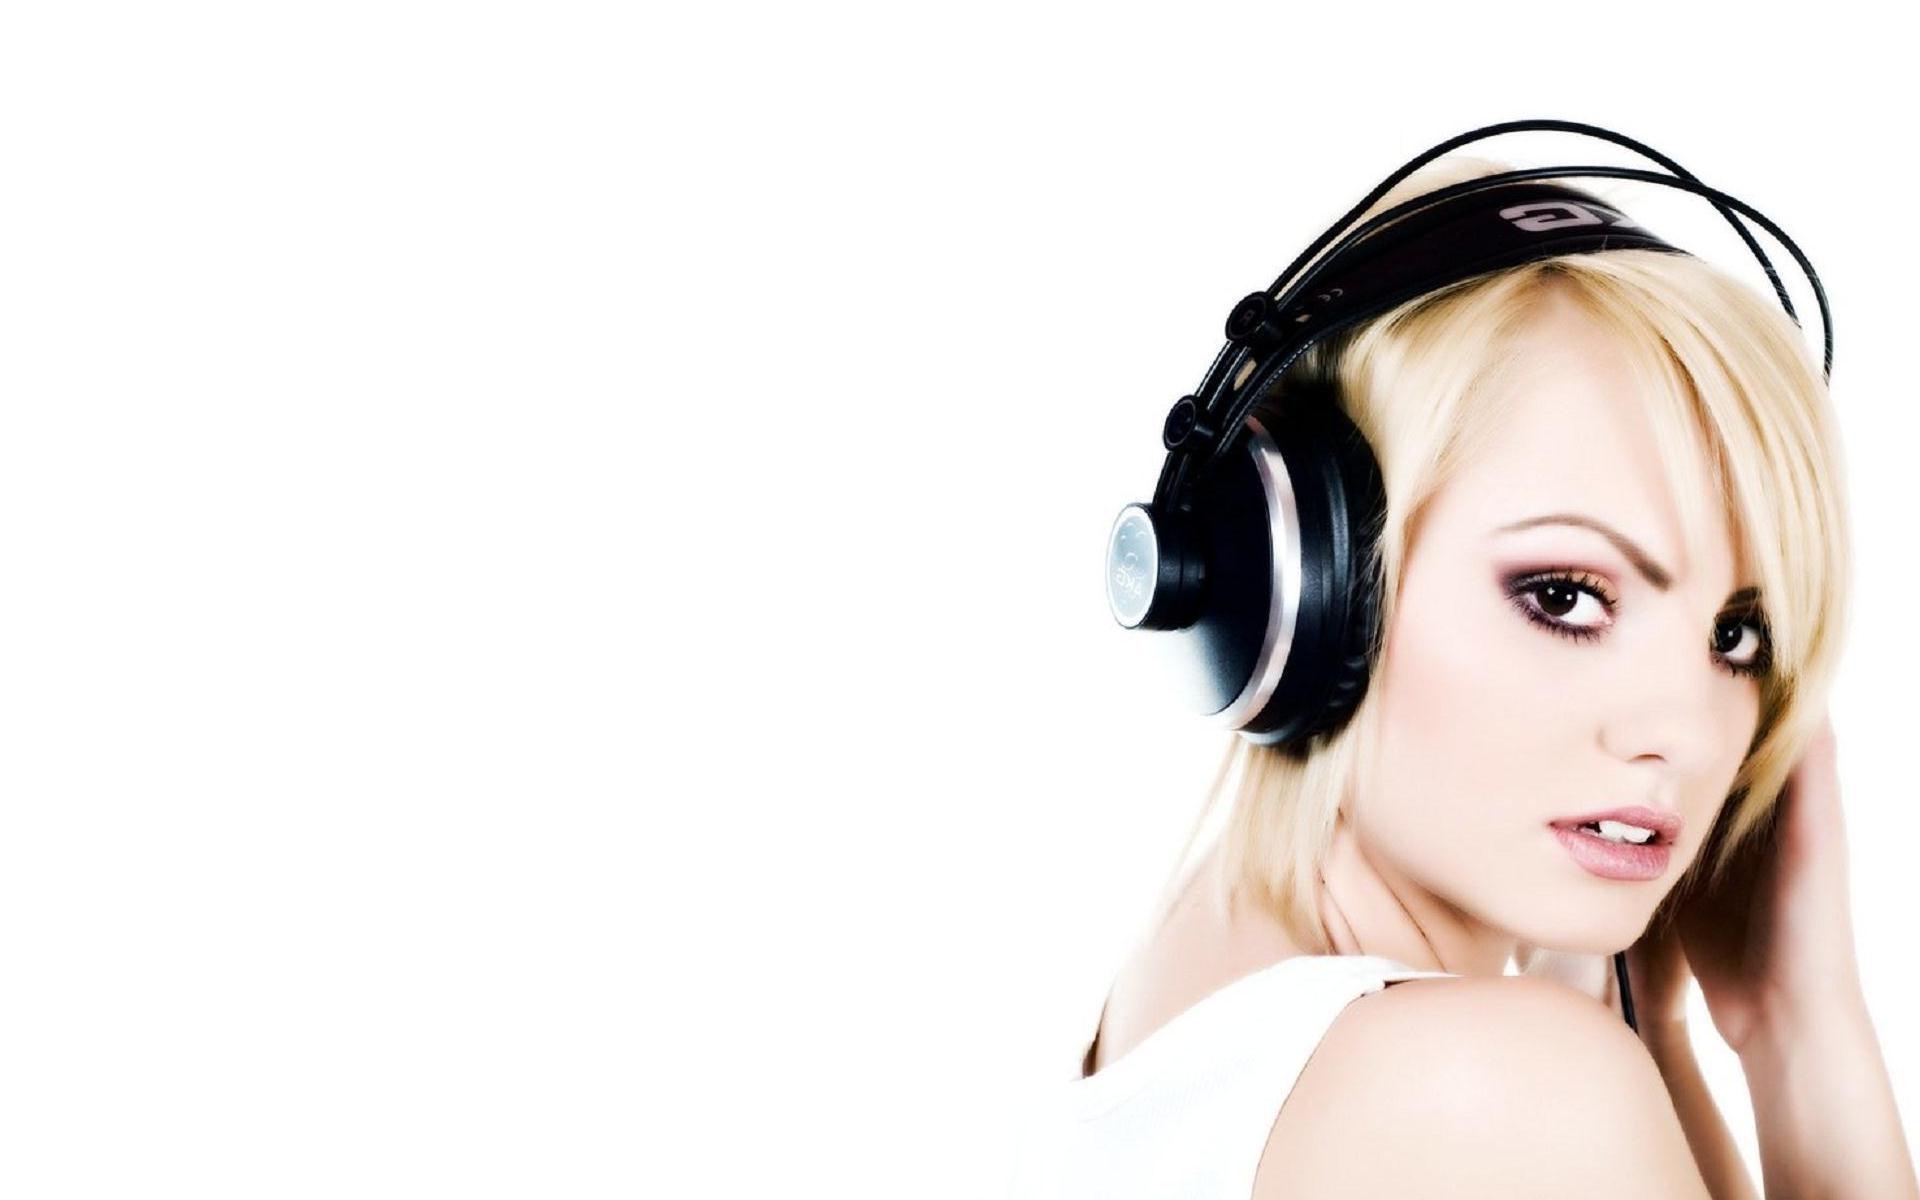 Alexandra Stan, Loic DL wallpapers, Ethereal landscapes, Beautiful imagery, 1920x1200 HD Desktop